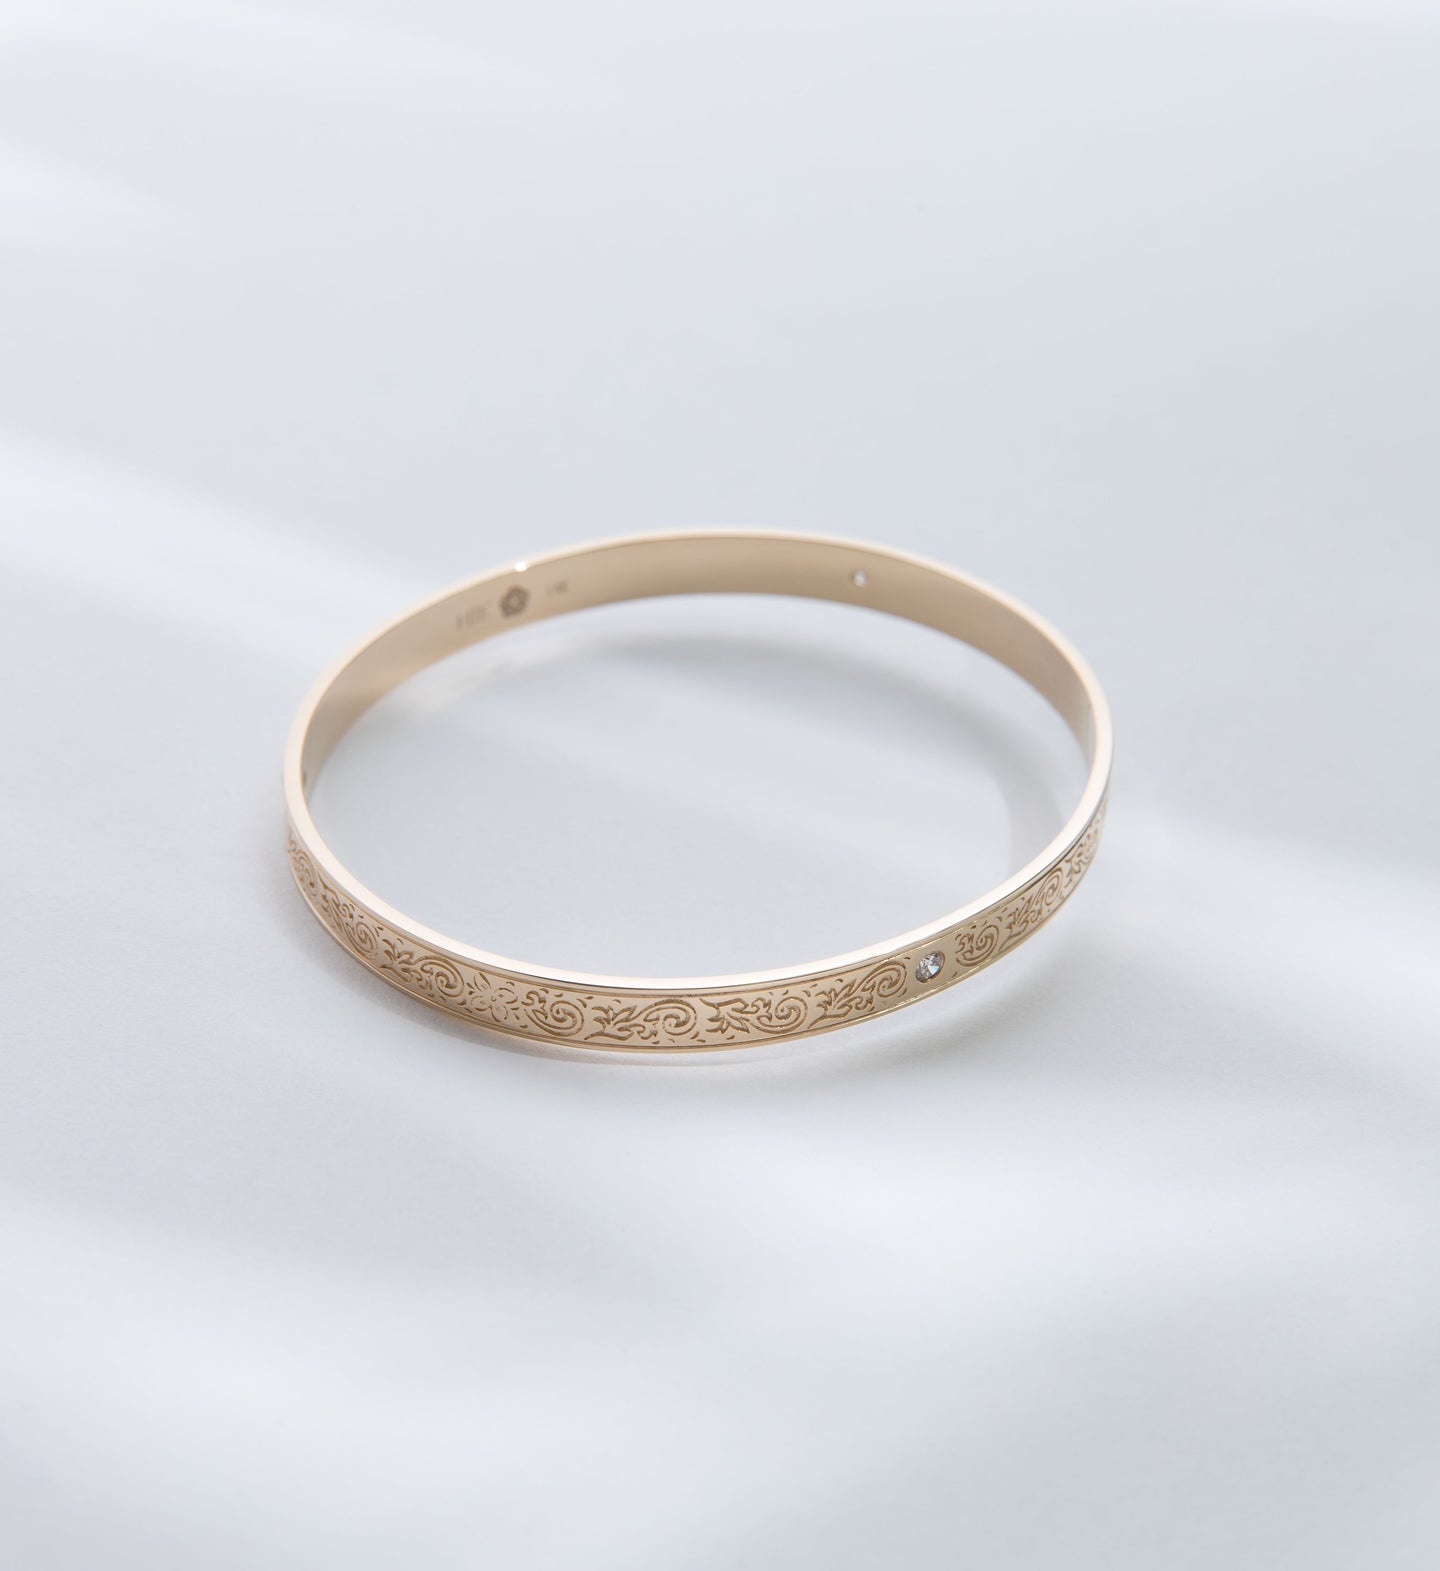 Hie Uluhe gold bangle bracelet with detailed engraving and diamonds